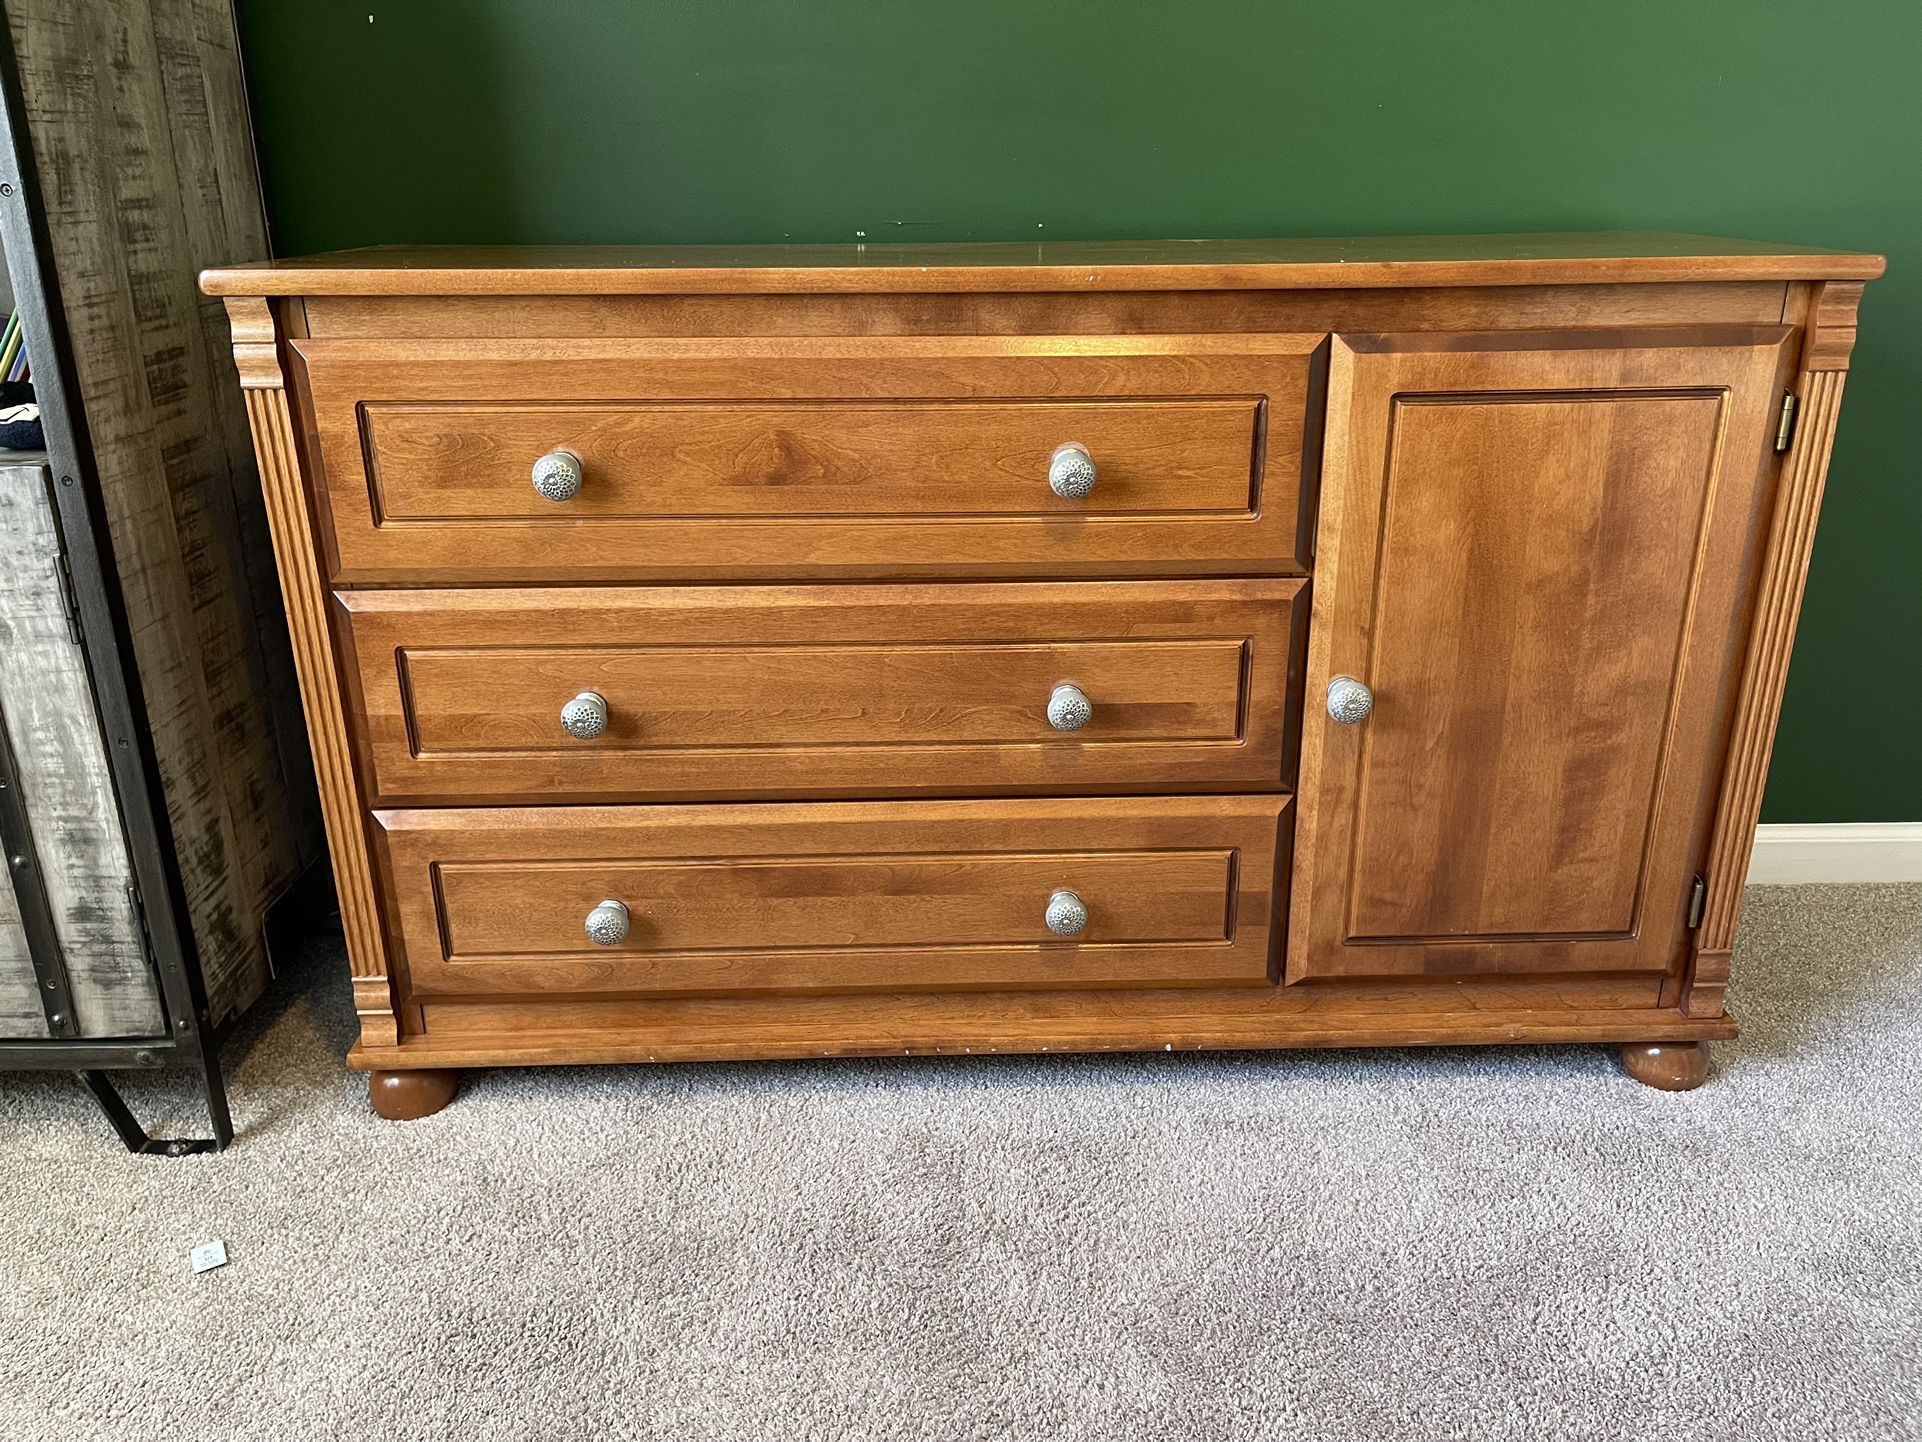 Bellini Crib and Dresser/ Changing Table